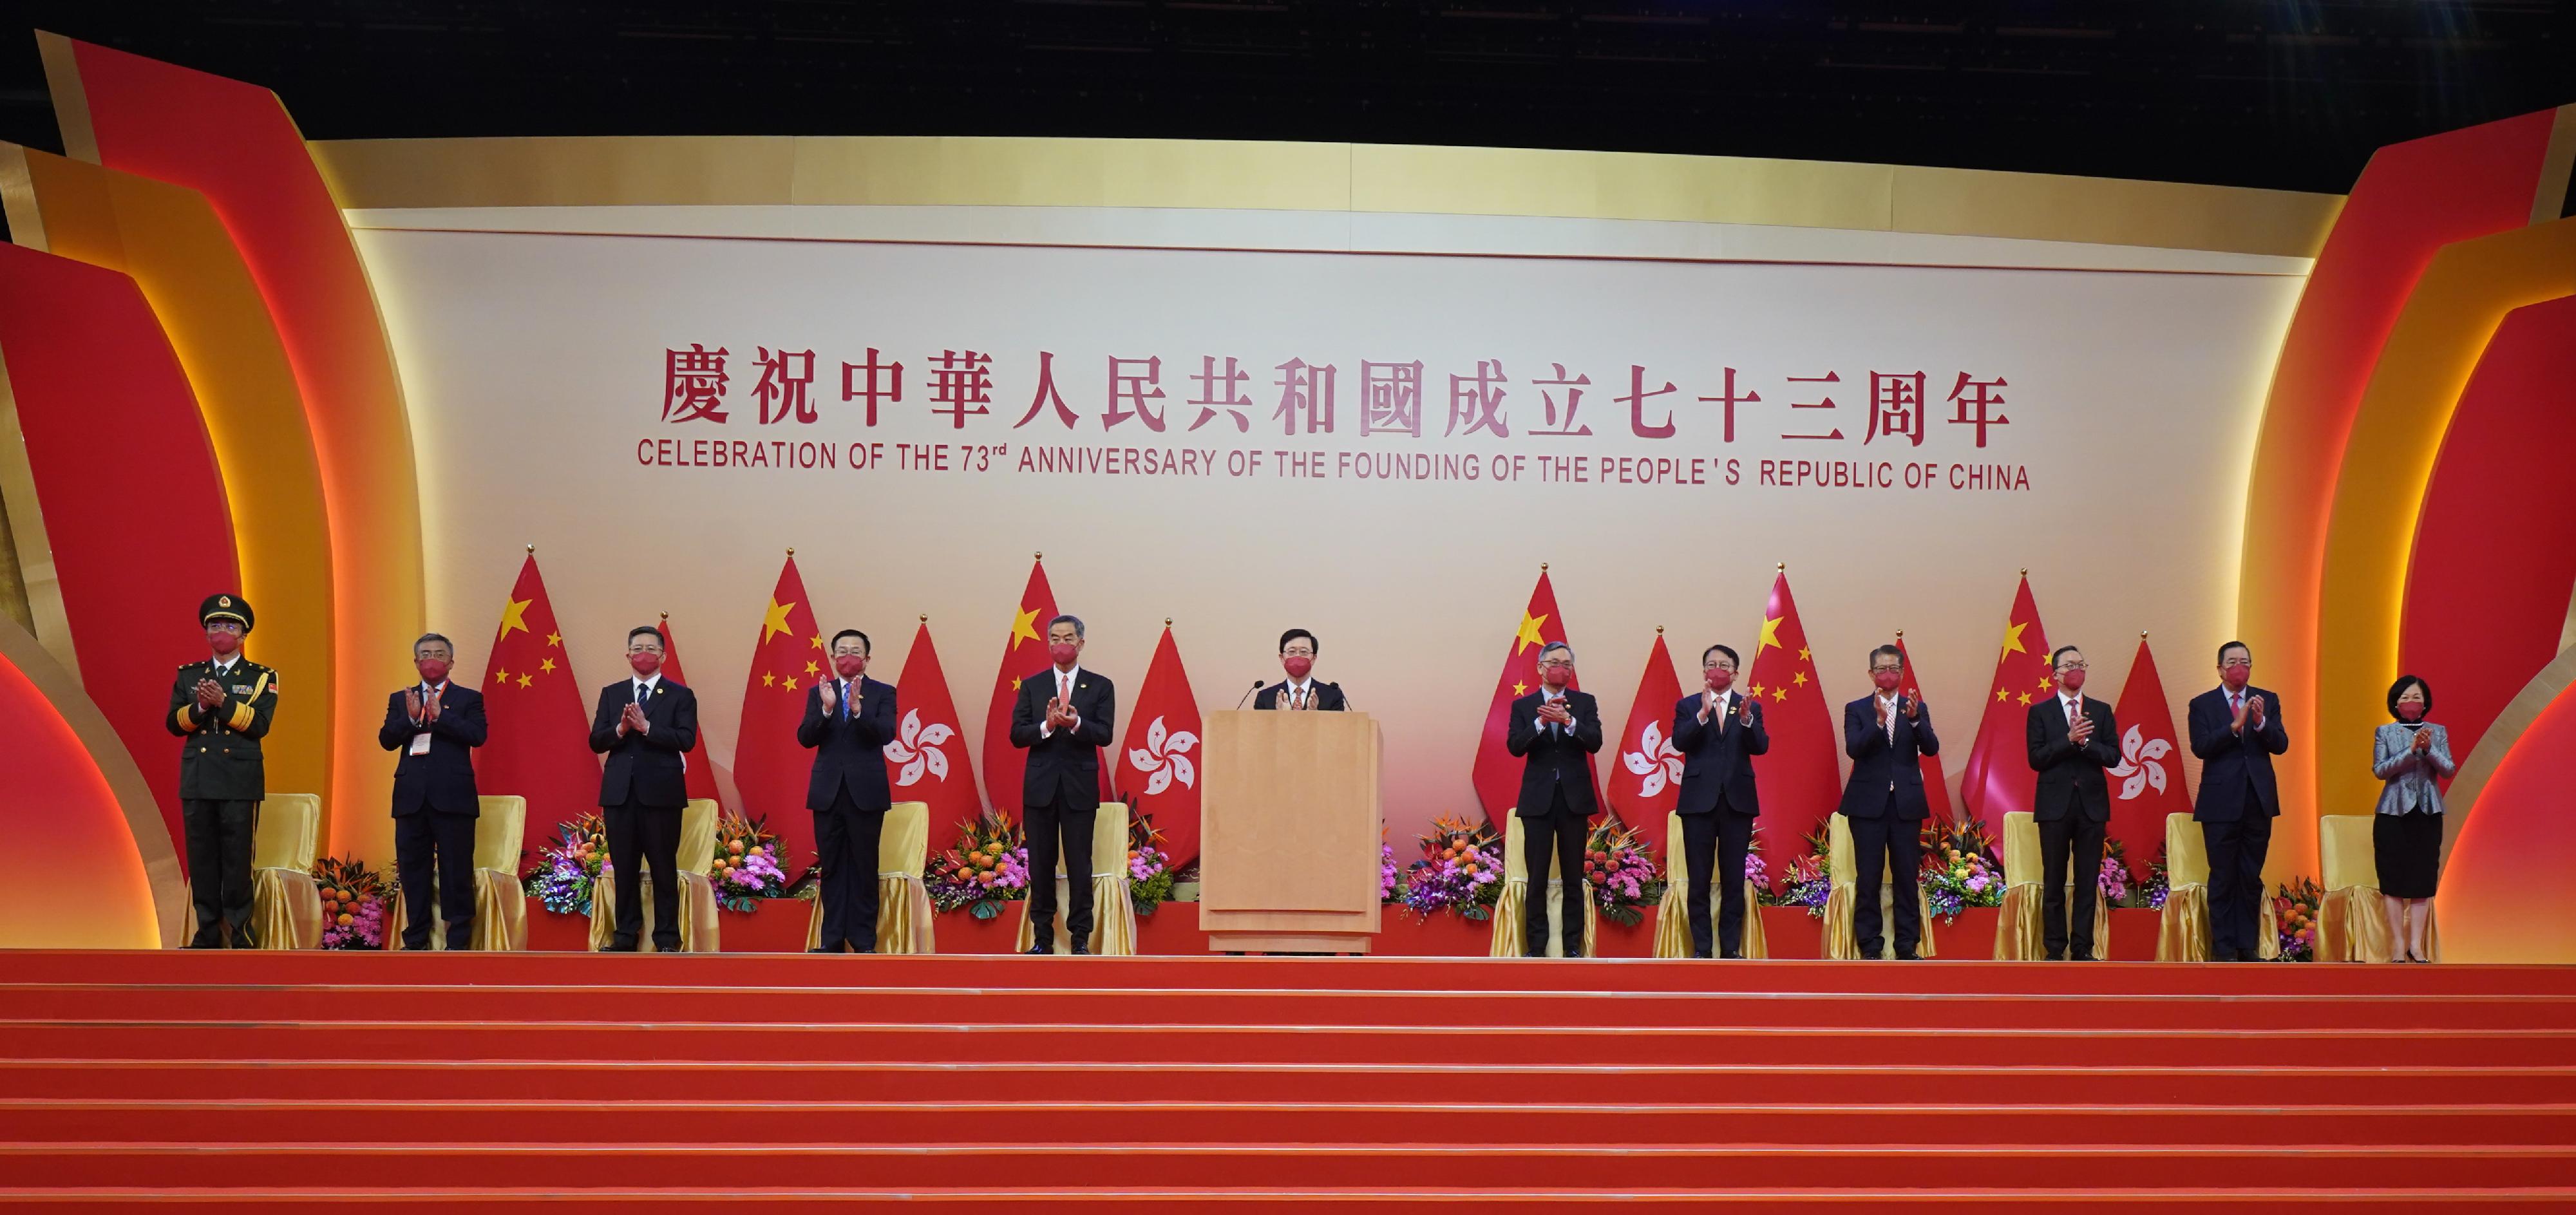 
The Chief Executive, Mr John Lee, together with Principal Officials and guests, attended the reception for the 73rd anniversary of the founding of the People's Republic of China at the Hong Kong Convention and Exhibition Centre this morning (October 1). Photo shows (from left) Deputy Commander of the Chinese People's Liberation Army Hong Kong Garrison Major General Zheng Guoyue; the Acting Commissioner of the Ministry of Foreign Affairs of the People's Republic of China in the Hong Kong Special Administrative Region (HKSAR), Mr Yang Yirui; Deputy Head of the Office for Safeguarding National Security of the Central People's Government in the HKSAR Mr Li Jiangzhou; Deputy Director of the Liaison Office of the Central People's Government in the HKSAR Mr He Jing; Vice-Chairman of the National Committee of the Chinese People's Political Consultative Conference Mr C Y Leung; Mr Lee; the Chief Justice of the Court of Final Appeal, Mr Andrew Cheung Kui-nung; the Chief Secretary for Administration, Mr Chan Kwok-ki; the Financial Secretary, Mr Paul Chan; the Secretary for Justice, Mr Paul Lam, SC; the President of the Legislative Council, Mr Andrew Leung; and the Convenor of the Non-official Members of the Executive Council, Mrs Regina Ip, proposing a wish at the wish-making ceremony.